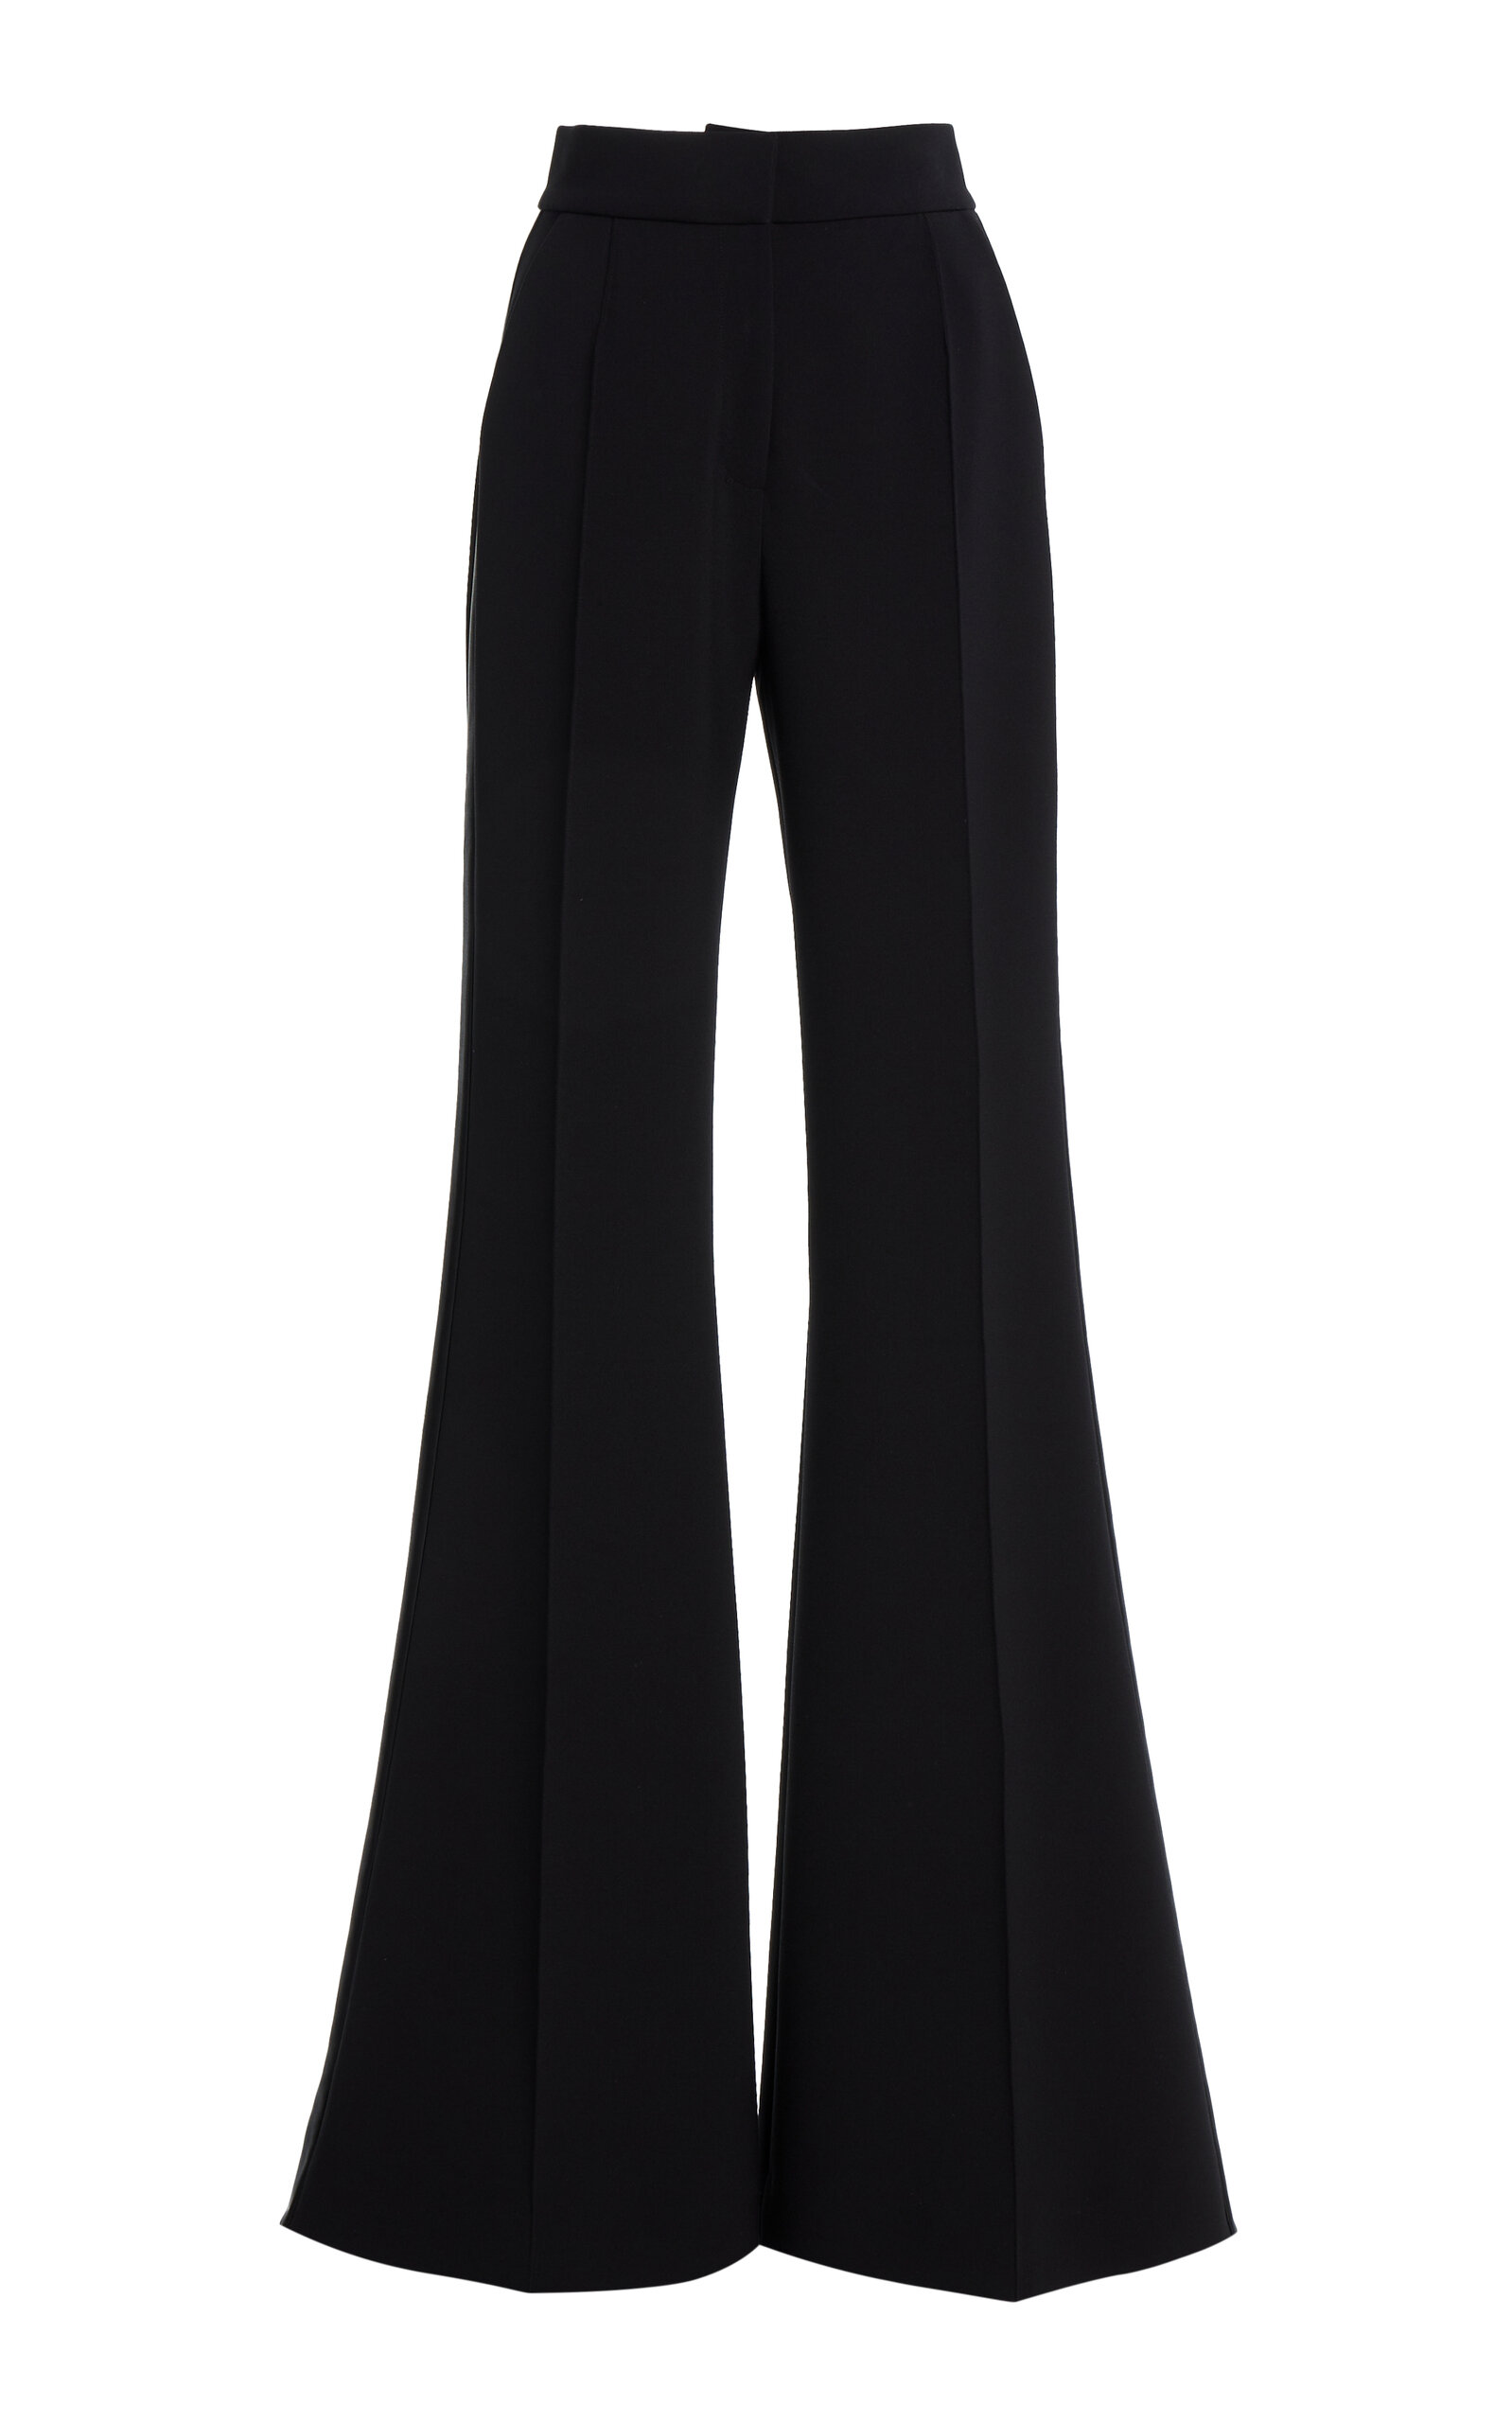 Cady And Satin Wide-Leg Pants